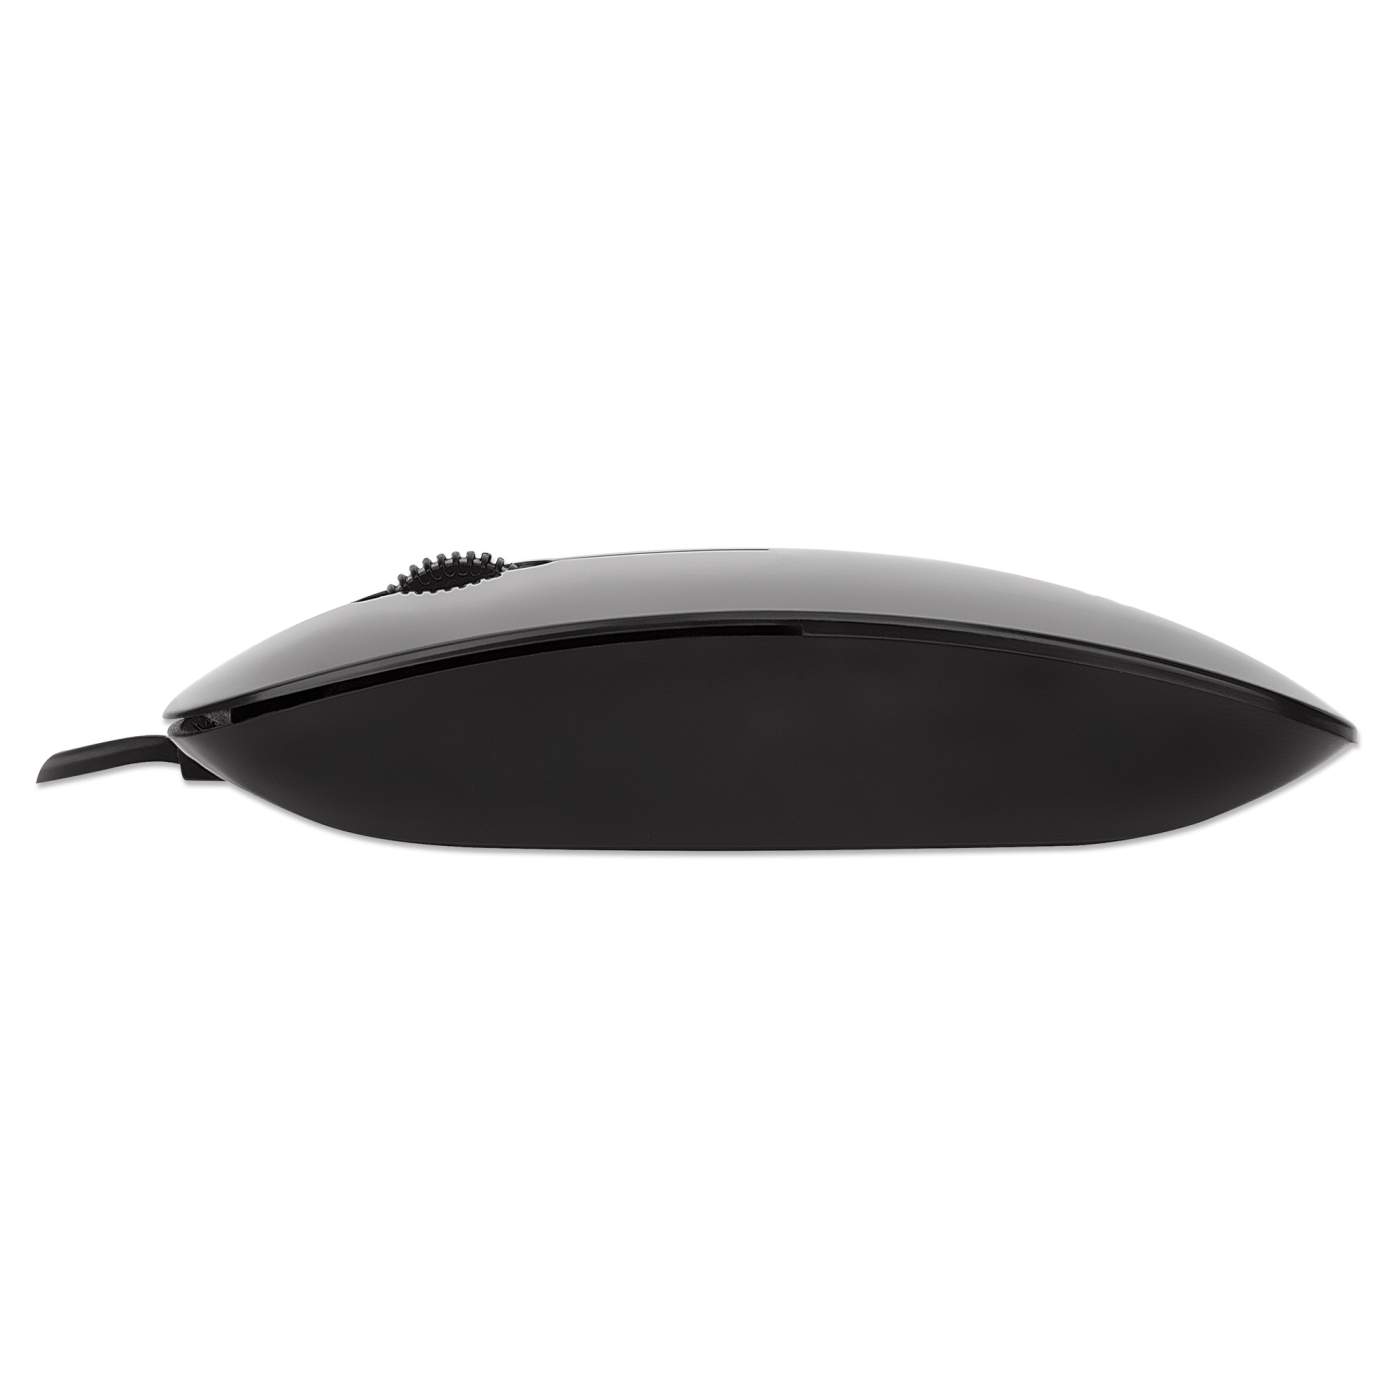 Silhouette Optical Mouse Image 7